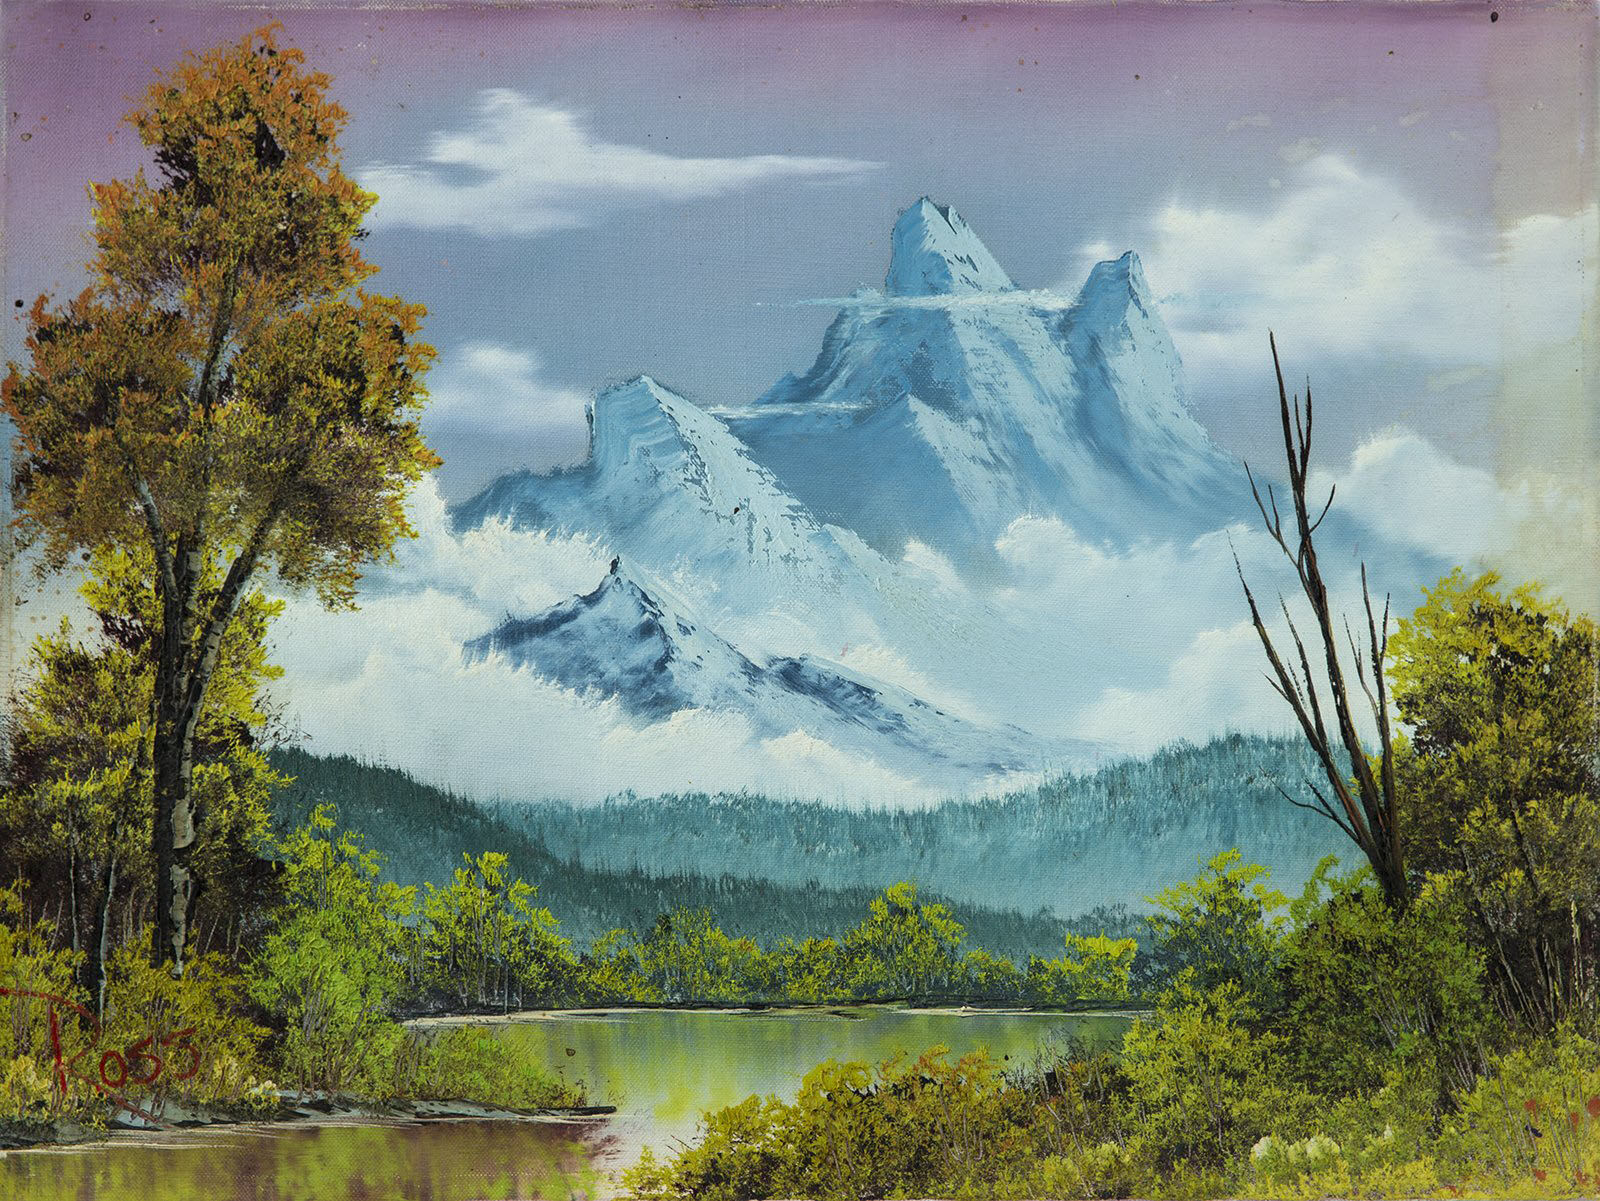 Bob Ross: Iconic Landscape Artist and An Enduring Inspiration | Max